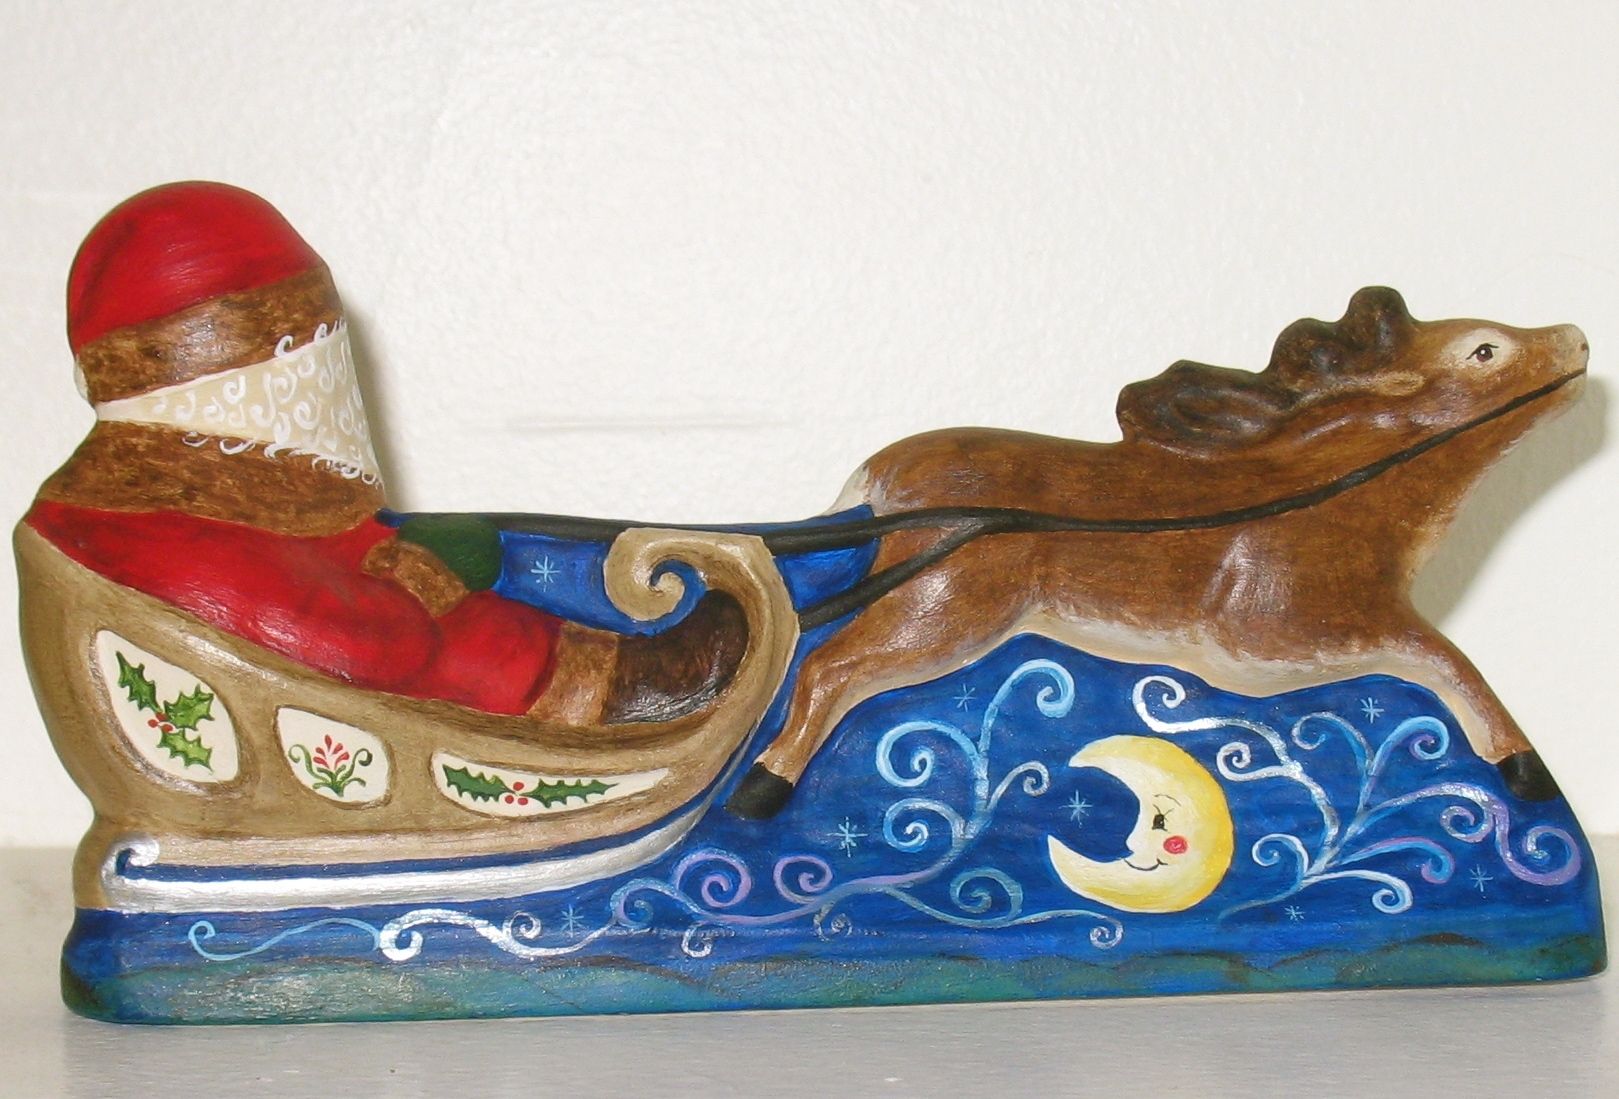 Hand Crafted Christmas Chalkware Santa On Sleigh From An